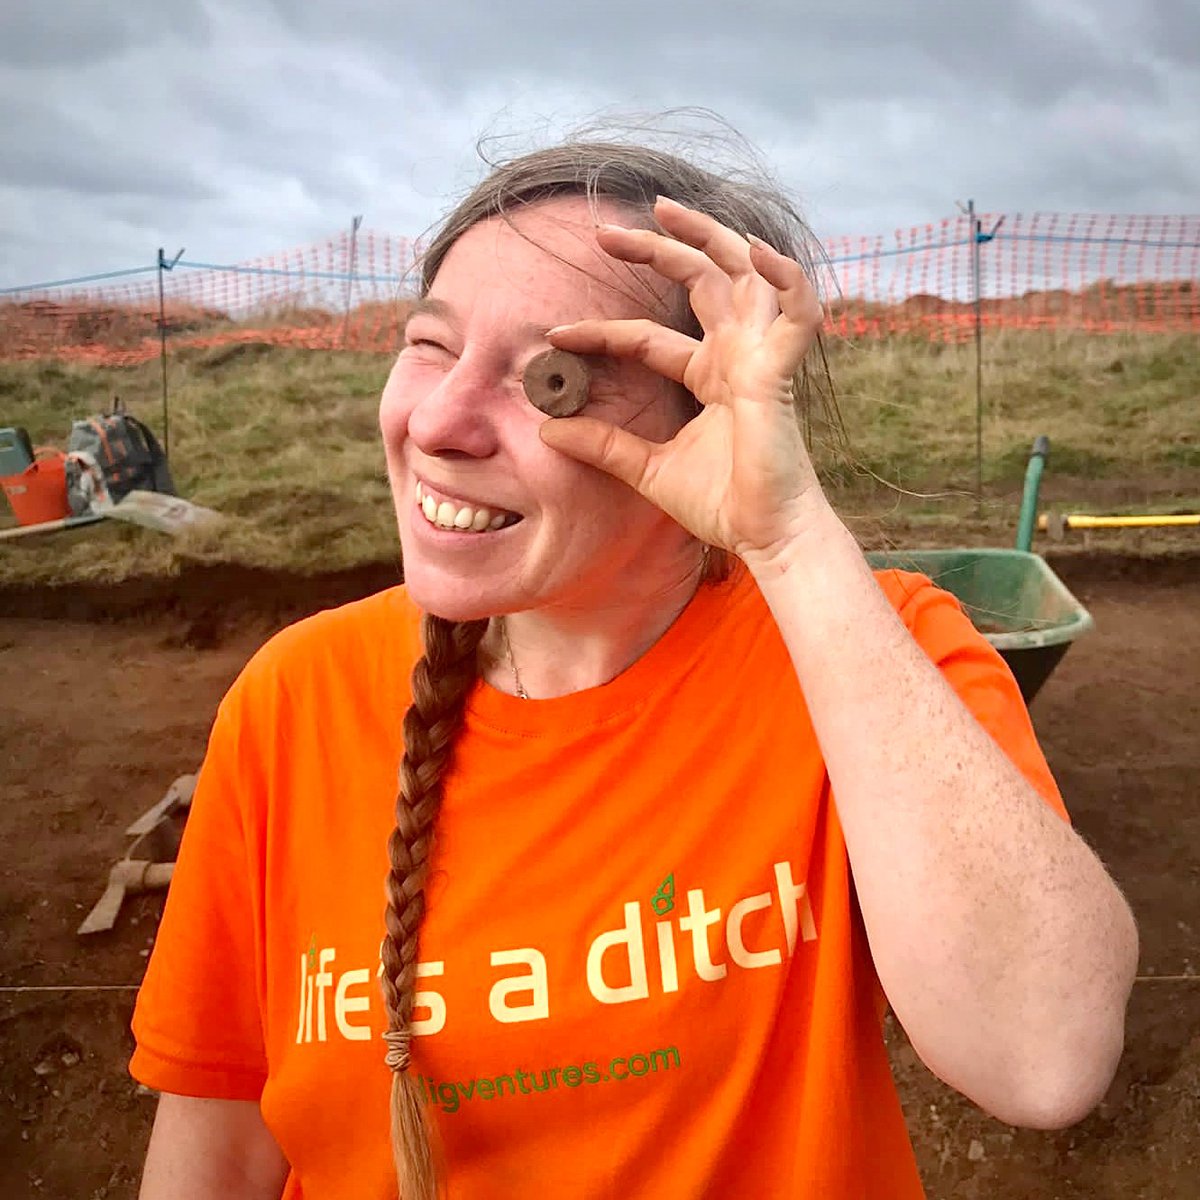 Today is the day!! Tune in to BBC2 TONIGHT at 8pm to catch us on #DiggingforBritain, and see our excavation with @CHERISHproj at Caerfai Promontory Fort in Pembrokeshire 🤩 Enjoy some of our favourite pictures from site as a little pre-viewing treat...